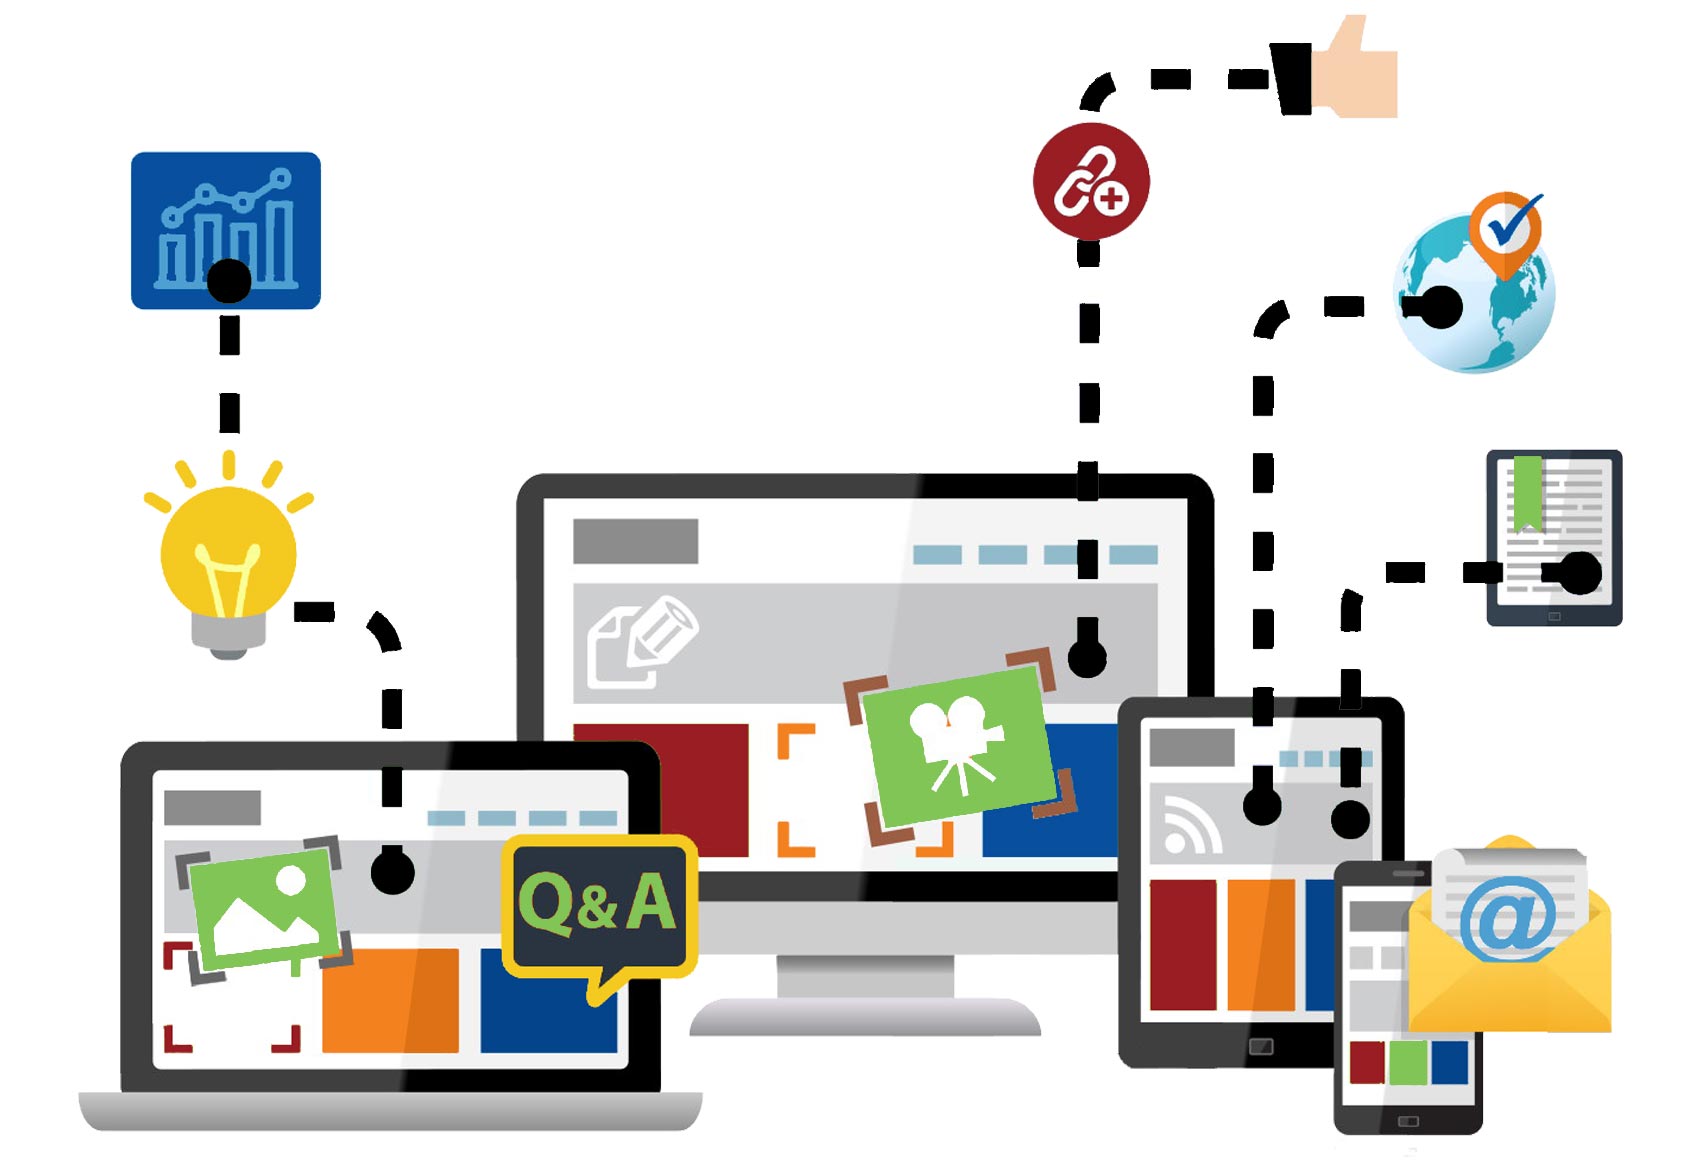 Illustration depicting website functionality and capabilities